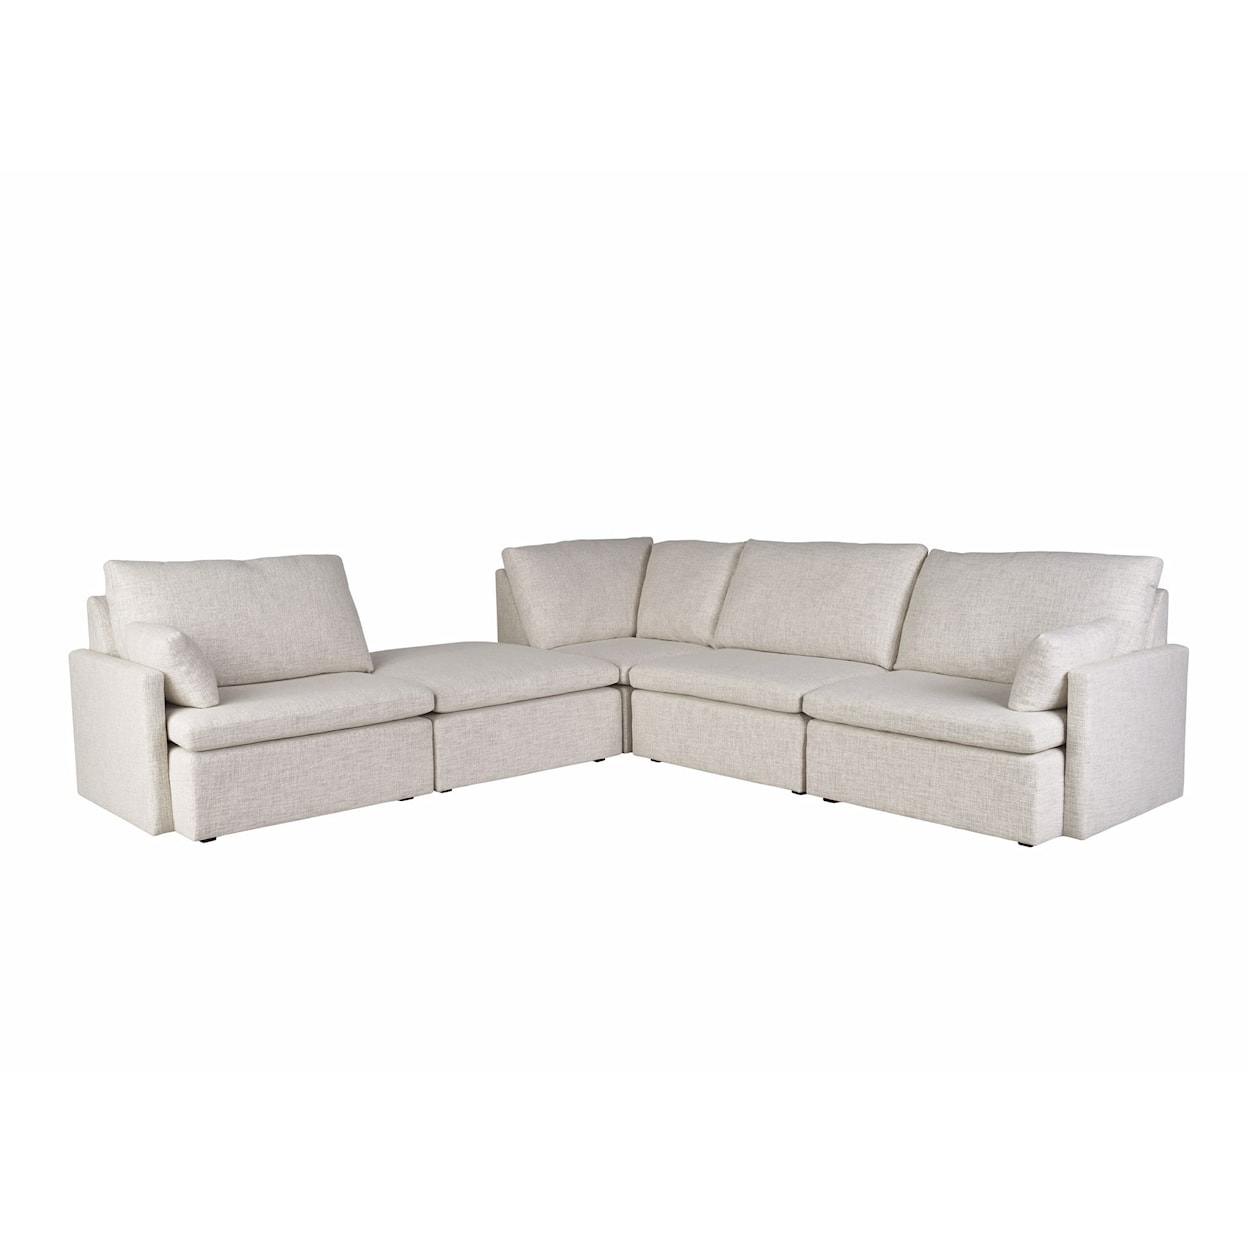 Universal Weekender Coastal Living Home Collection Sectional